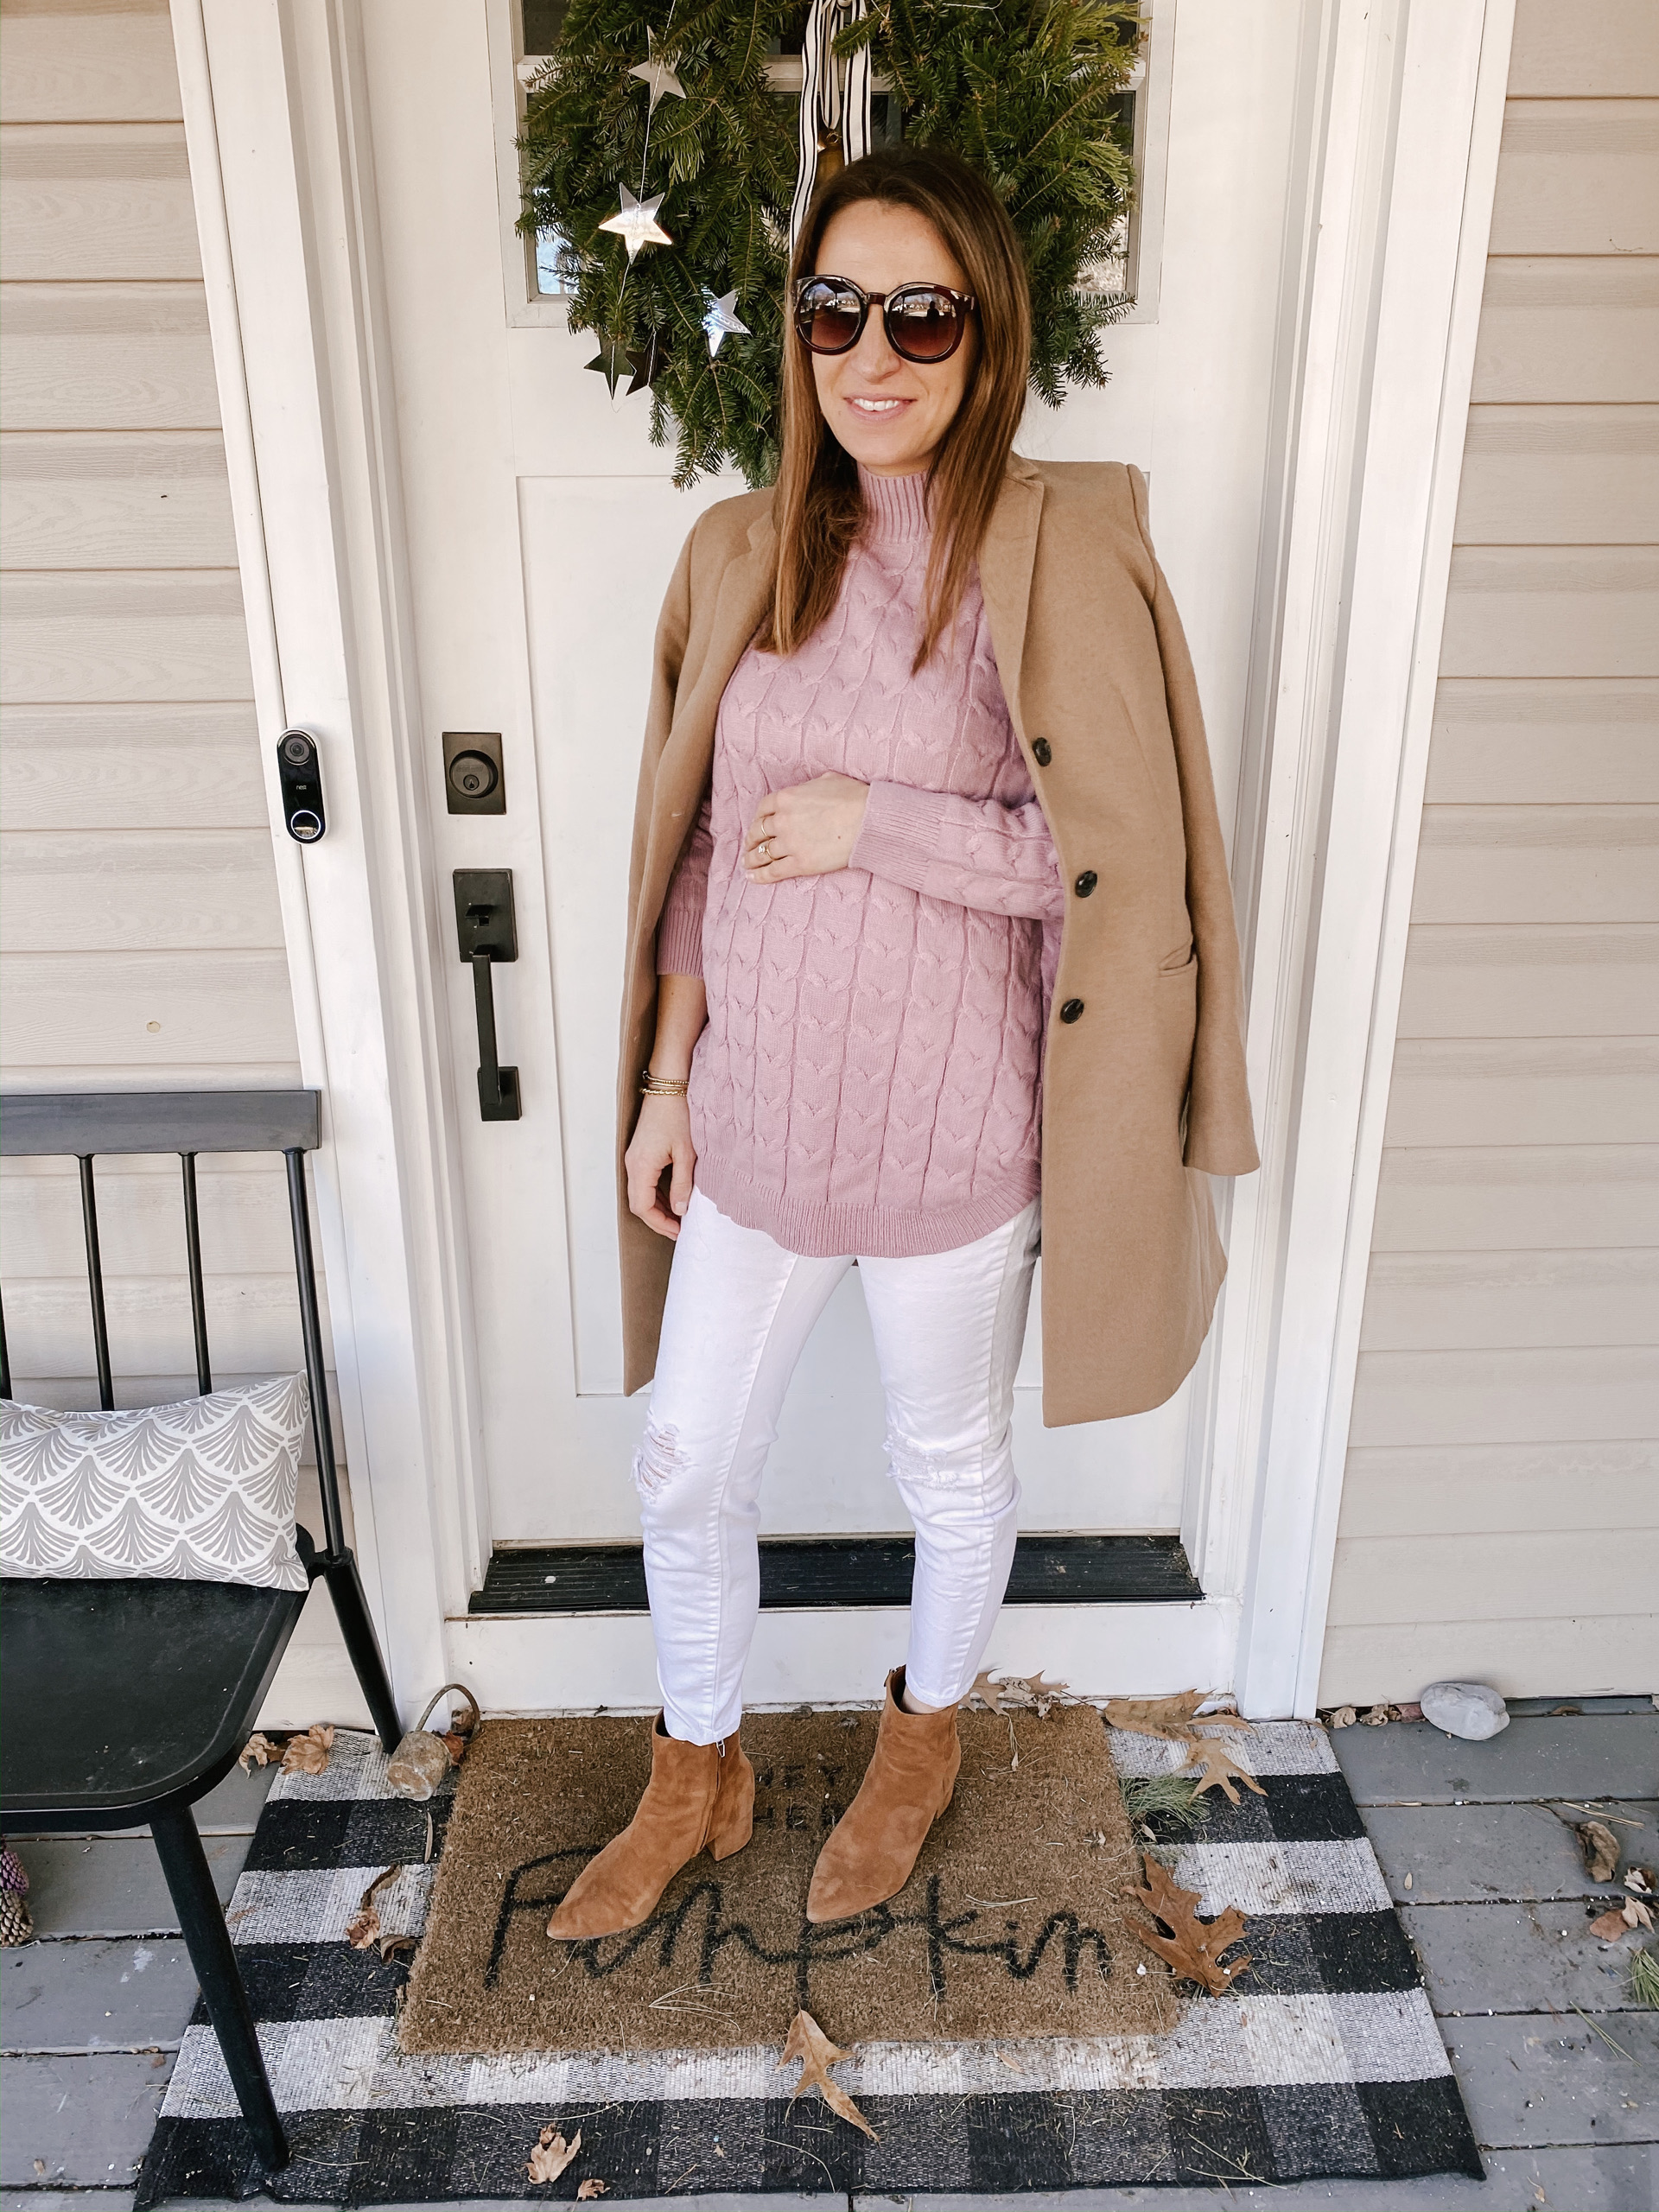 20 Best Pregnancy Outfits That Are Comfortable & Trendy